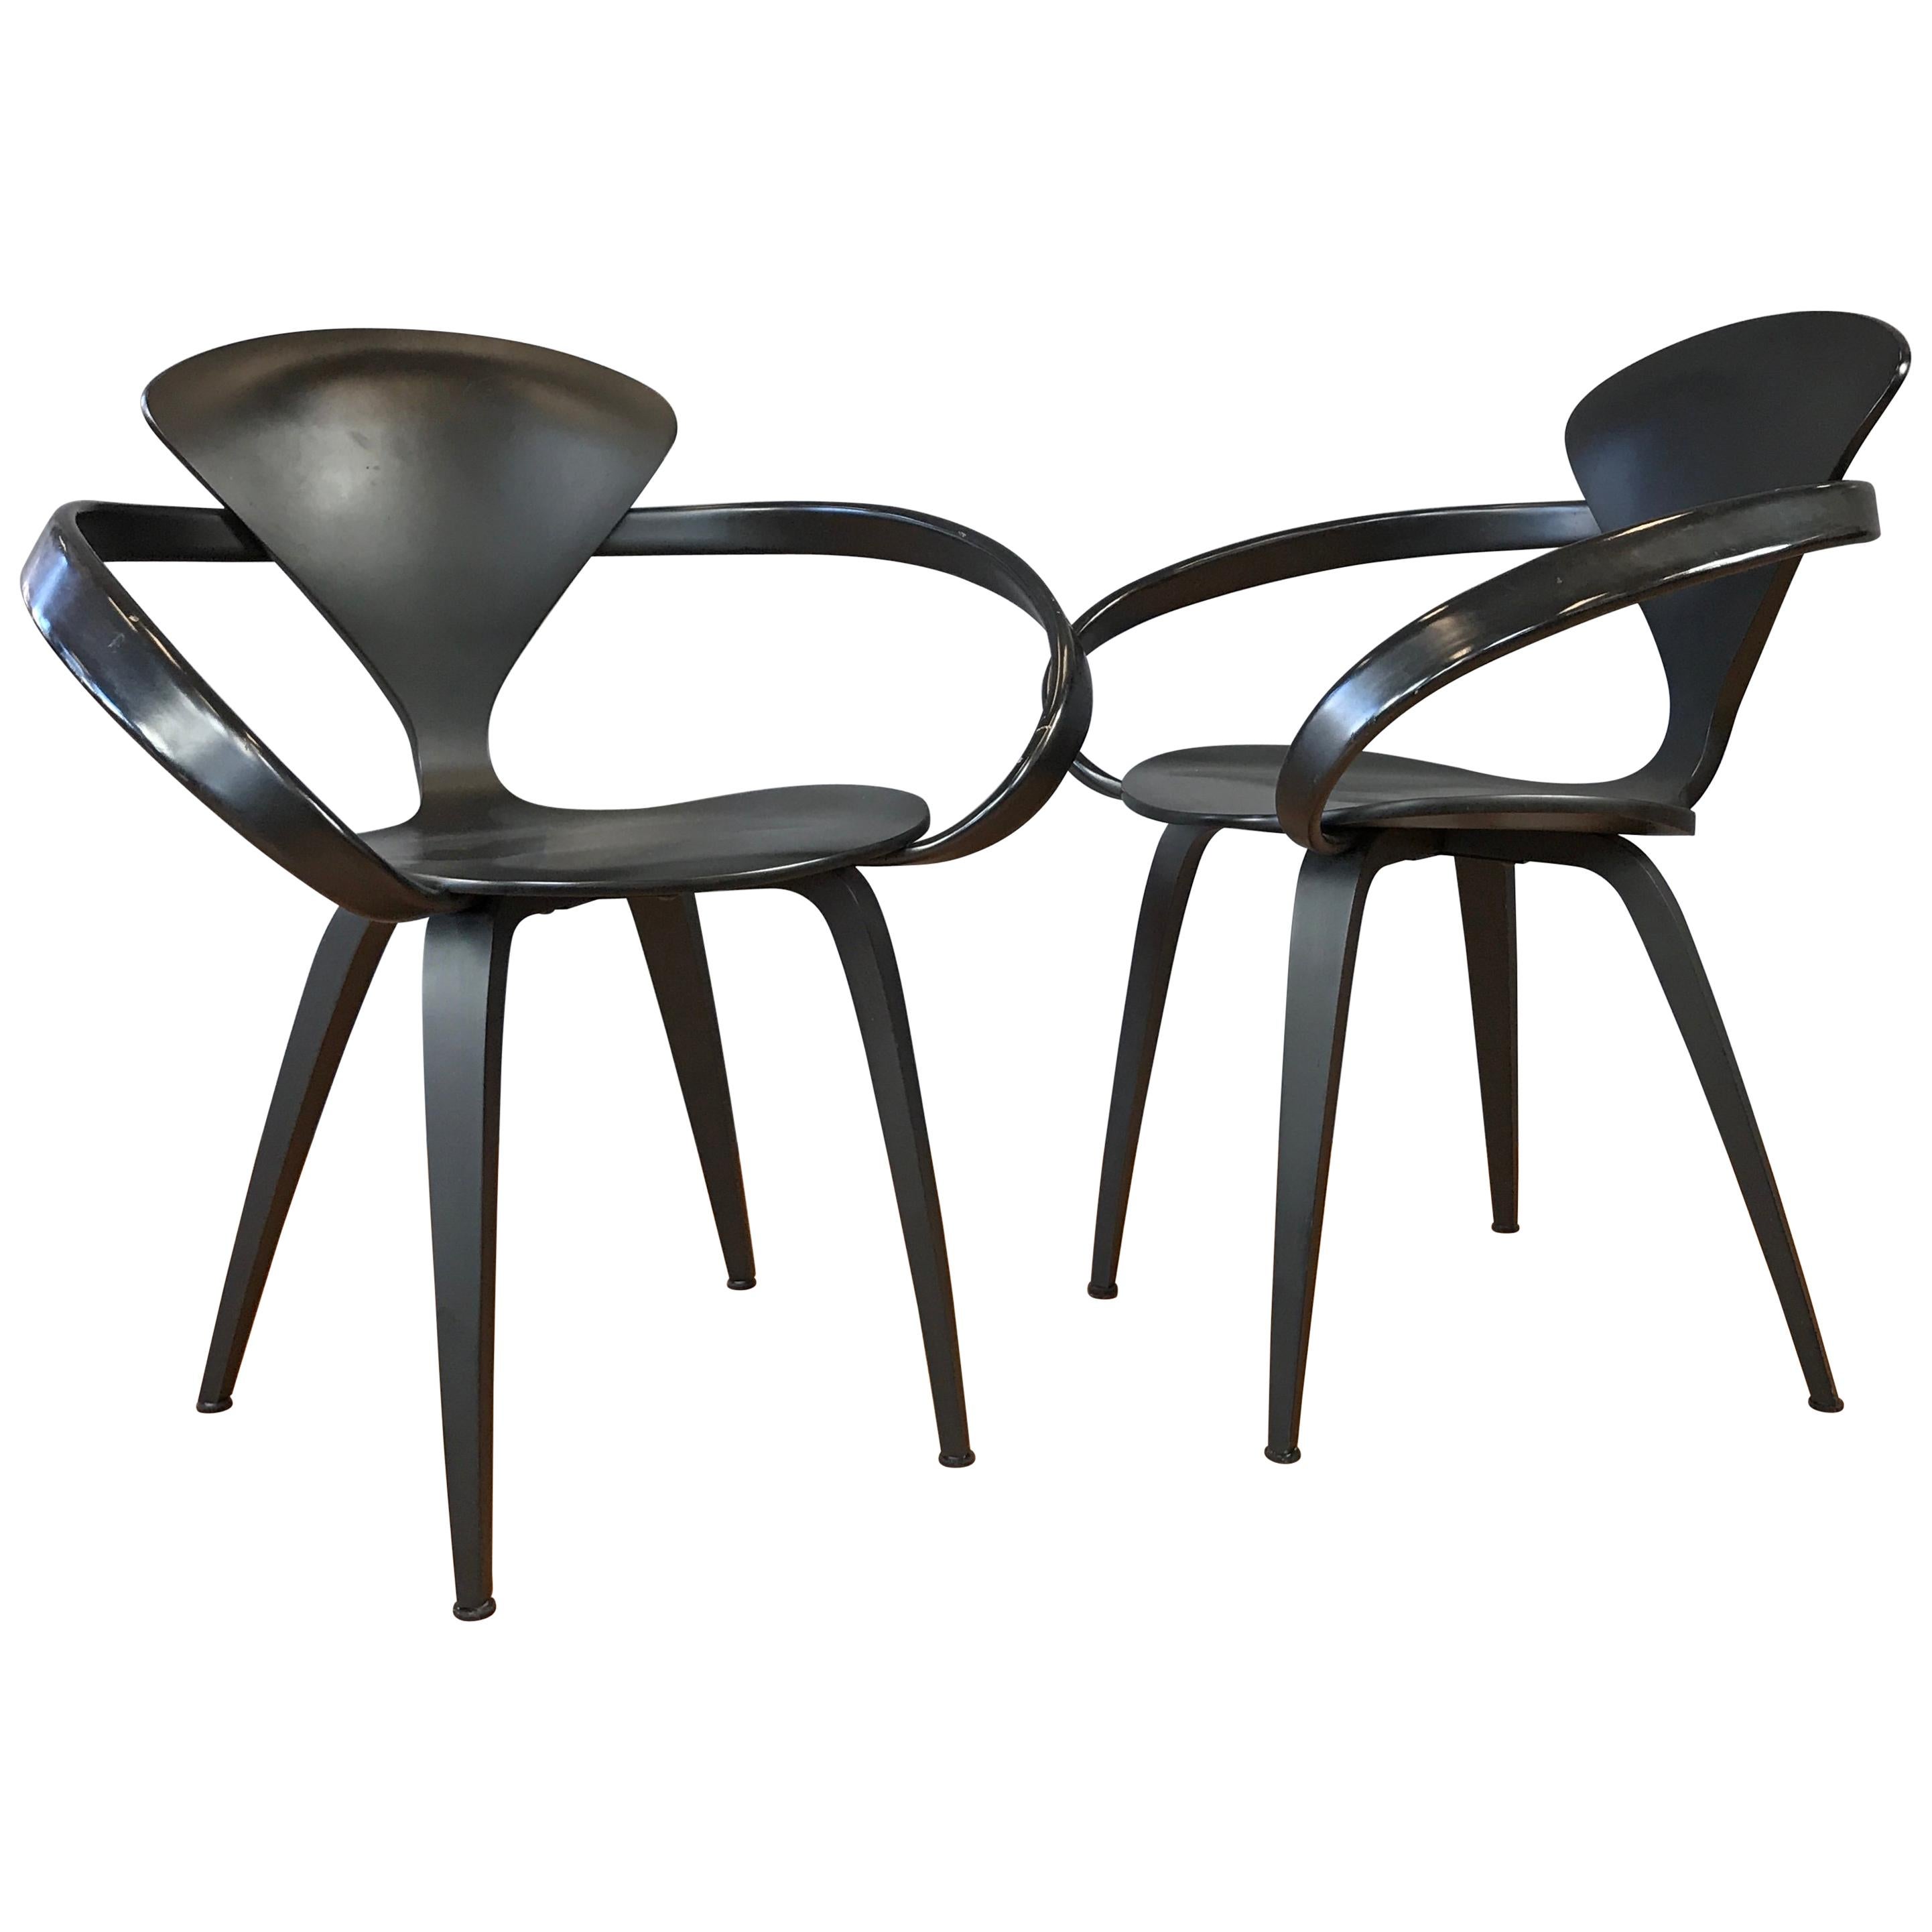 Two Black Cherner Armchairs Designed by Norman Cherner